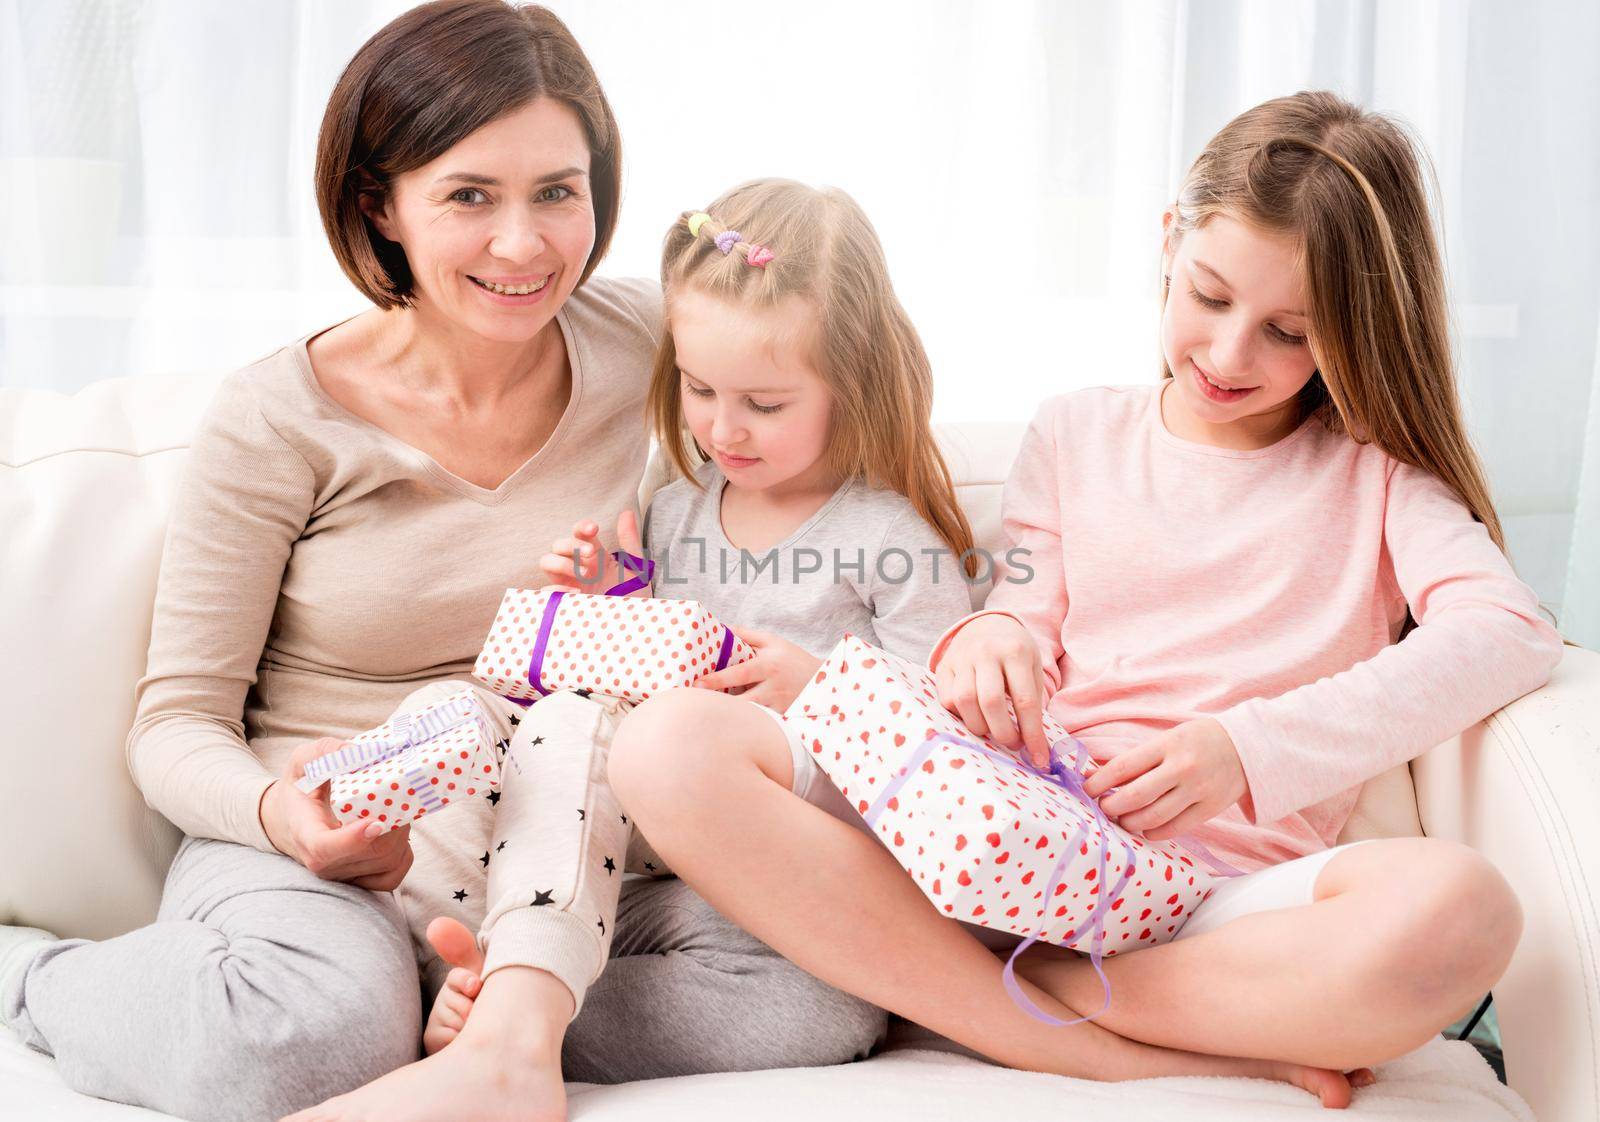 Cheerful mom and her beautiful daughters exchanging gifts